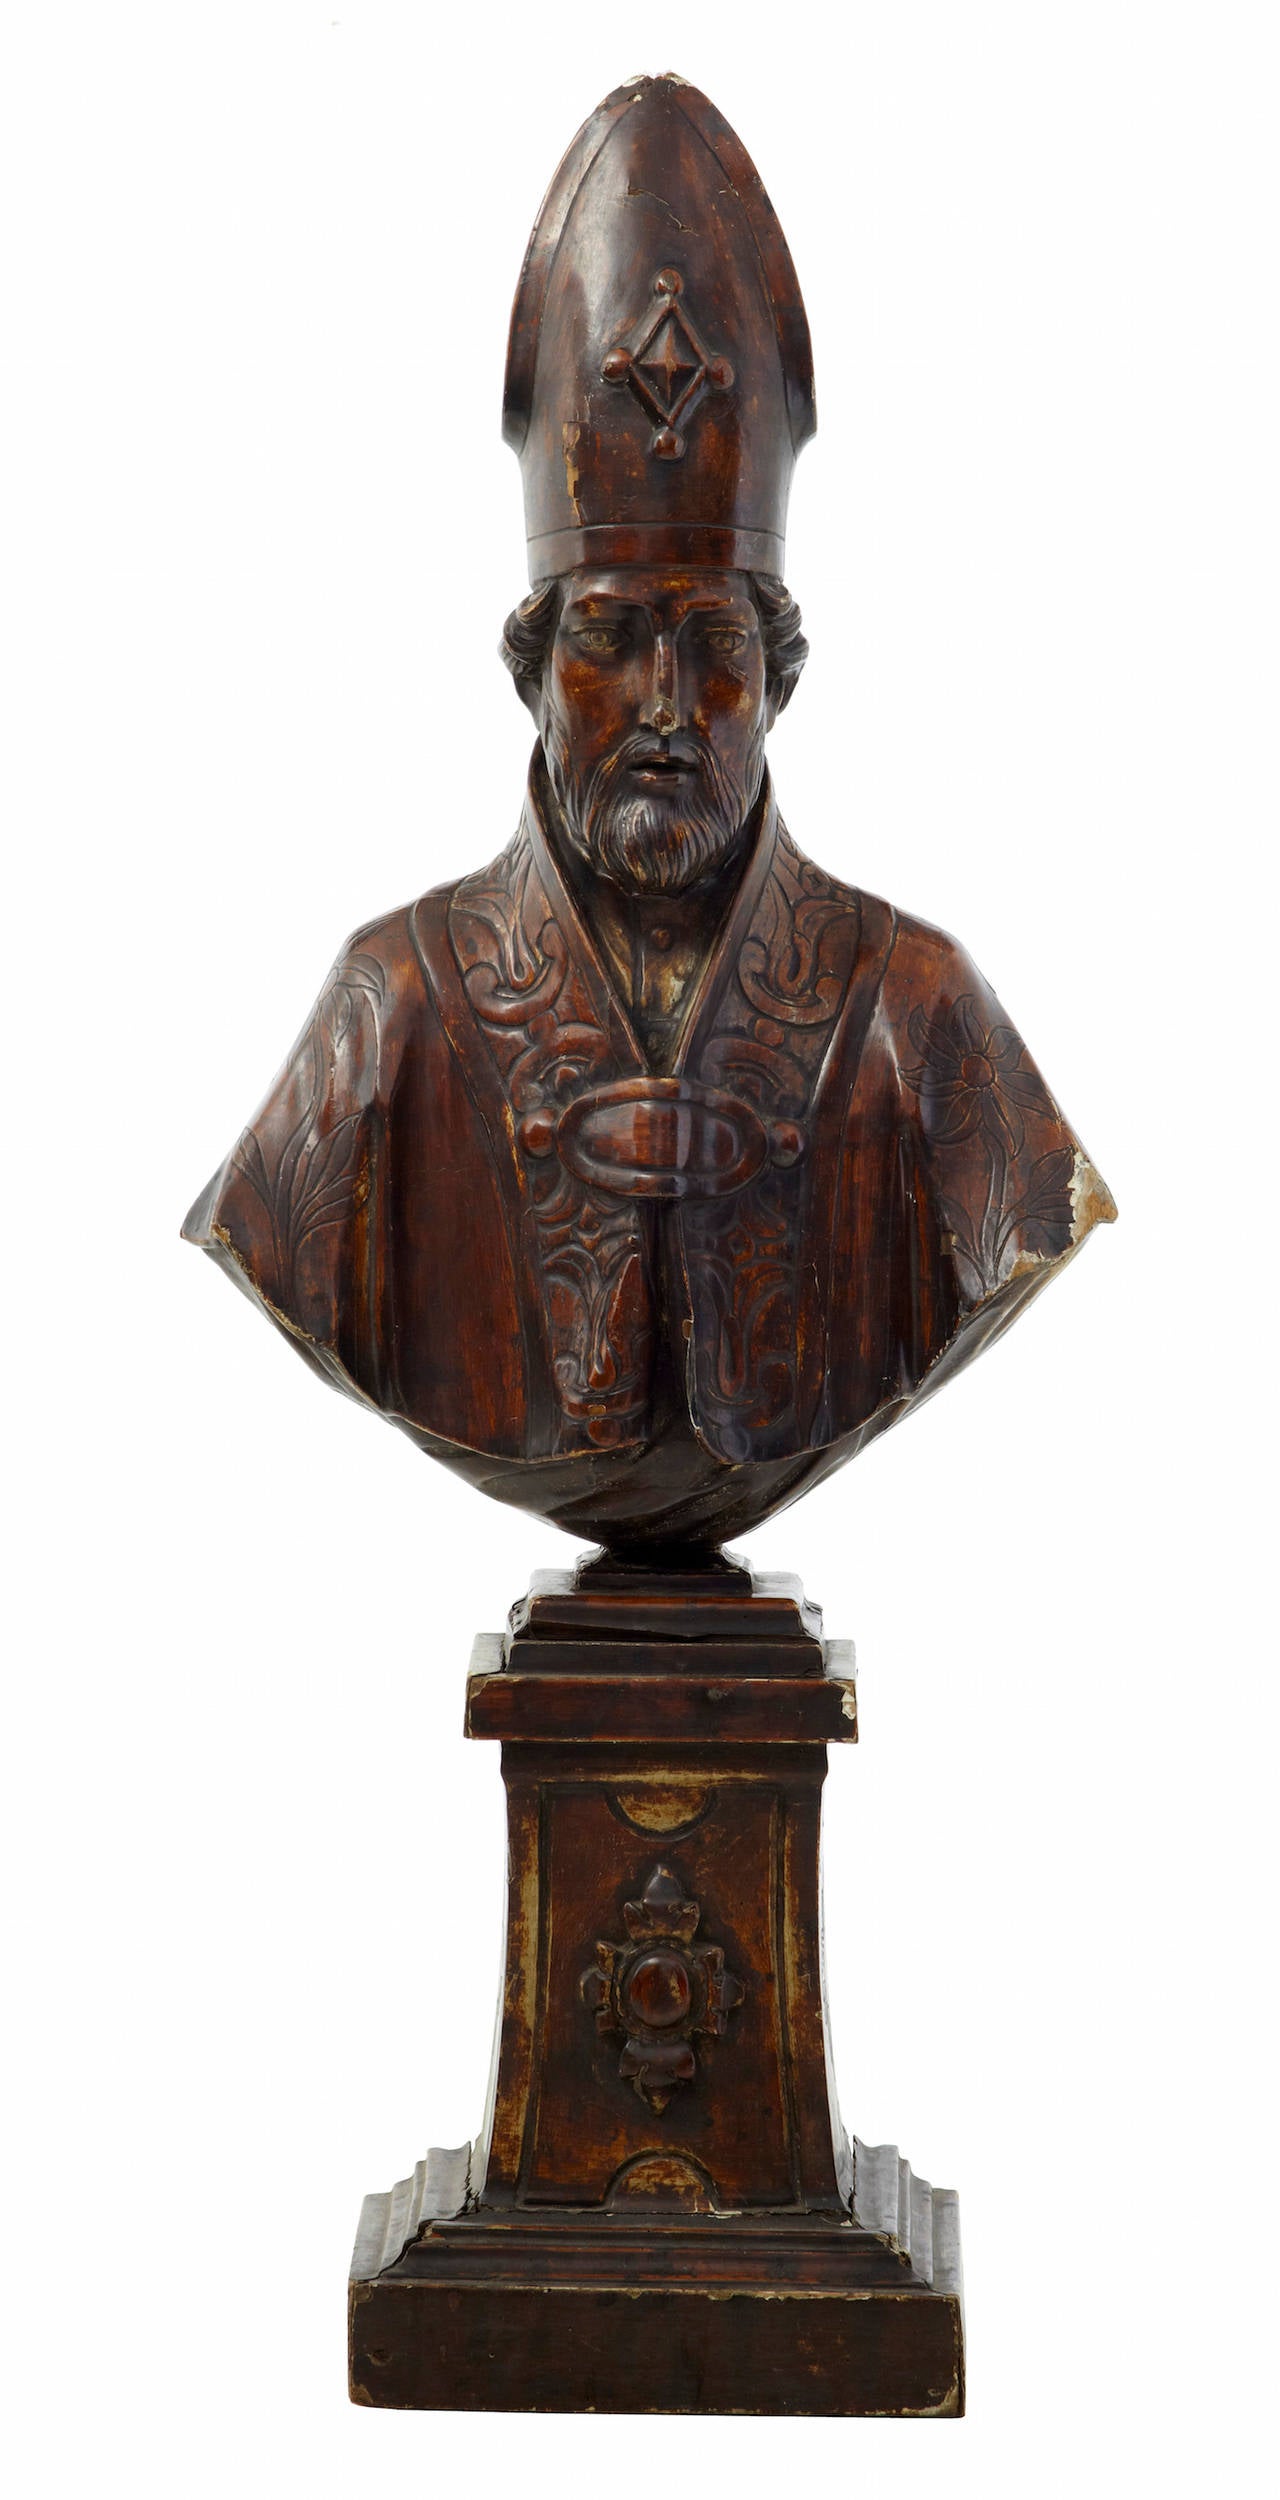 Spanish carved bust of a bishop circa 1840.
Made in limewood with original gesso and paint.
Mounted on original pedestal.
Losses and splits please see pictures.

HEIGHT: 53 3/4